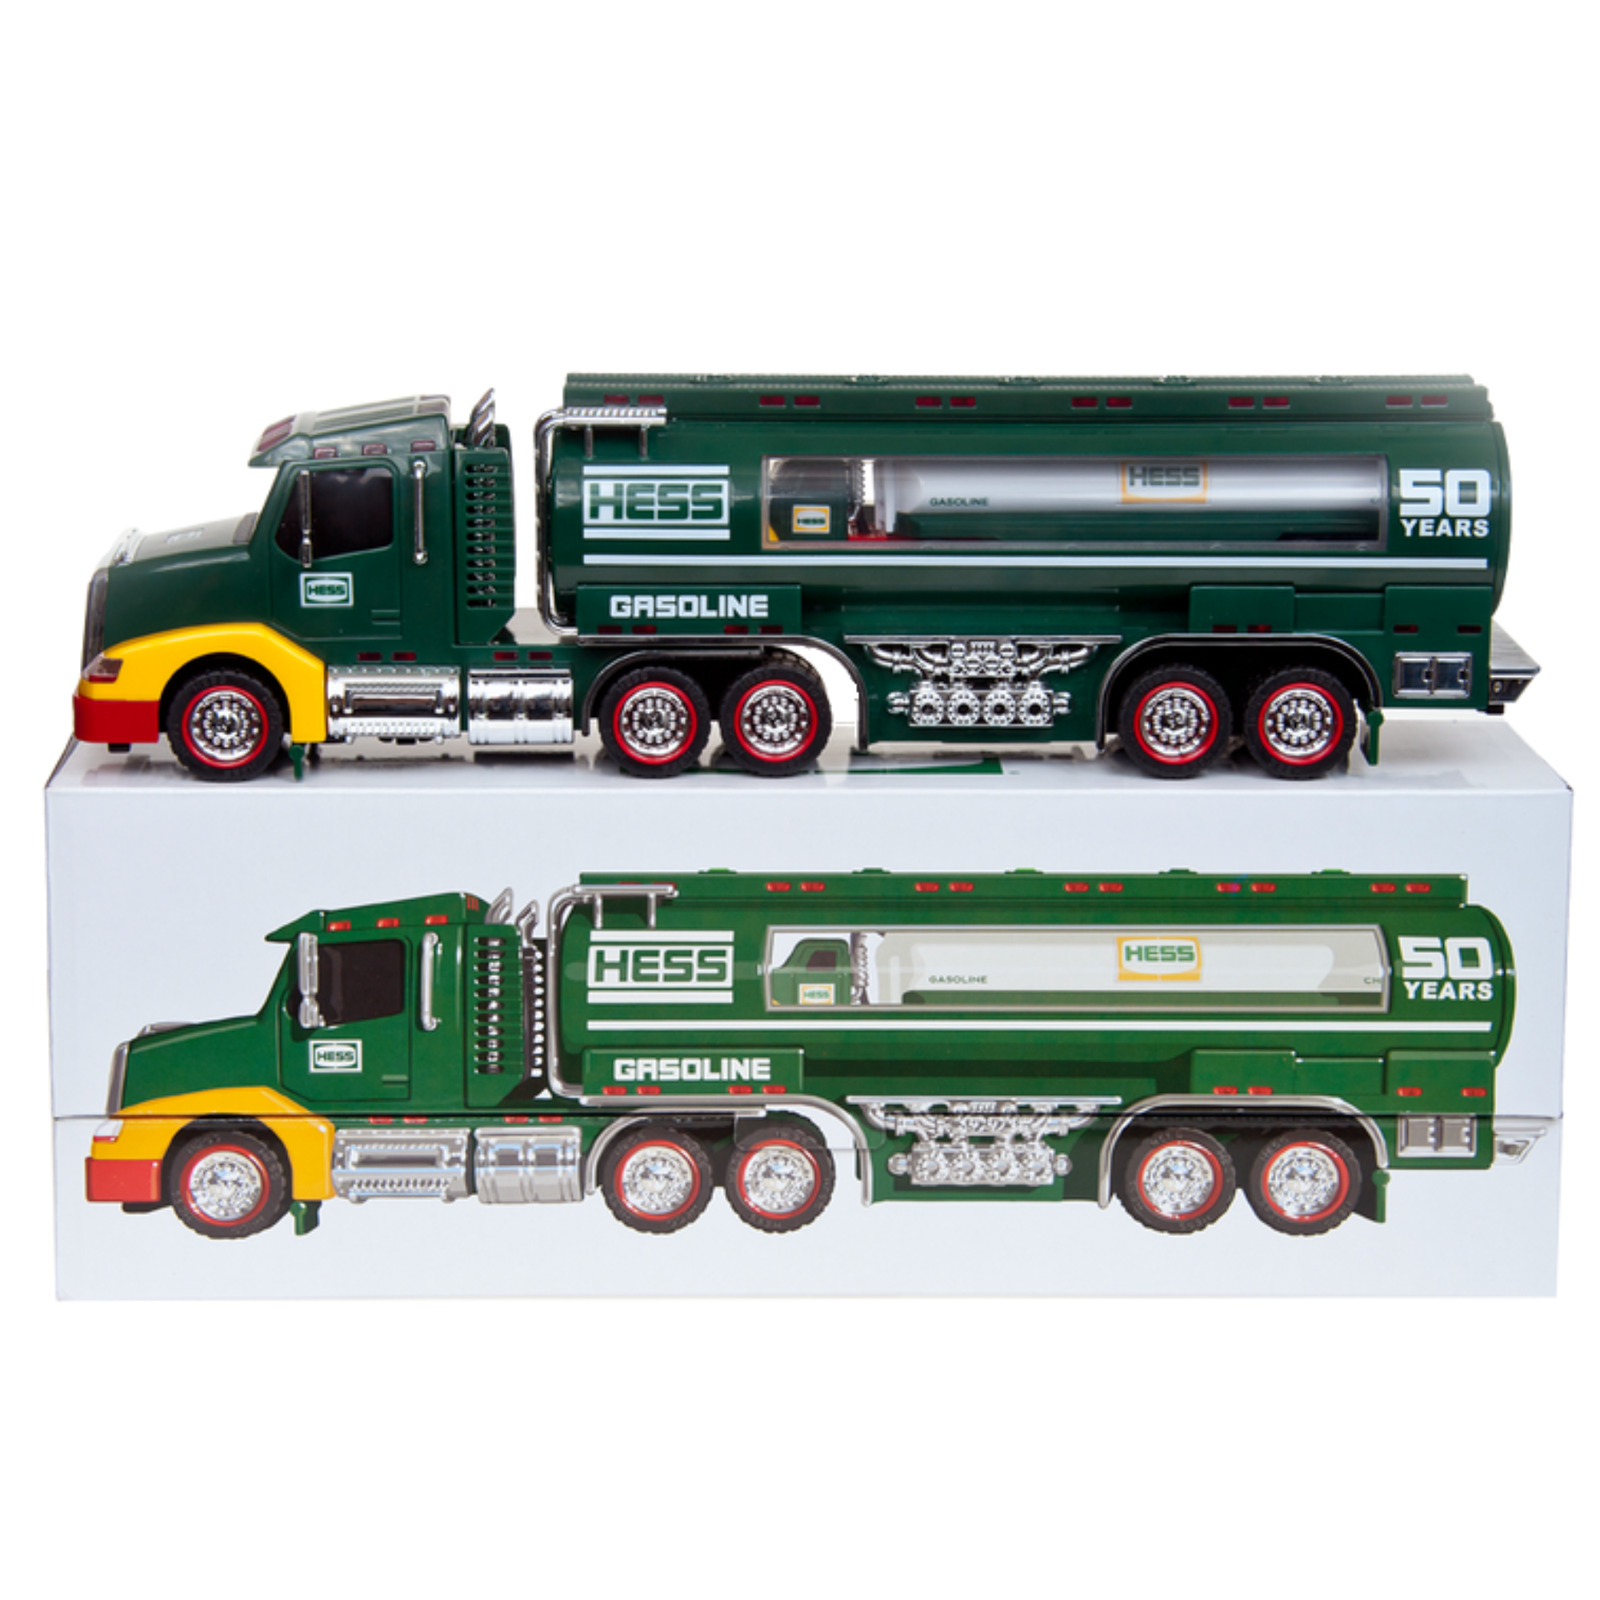 2014 Hess 1964 Toy Truck 50th Anniversary Collector Edition Limited Edition